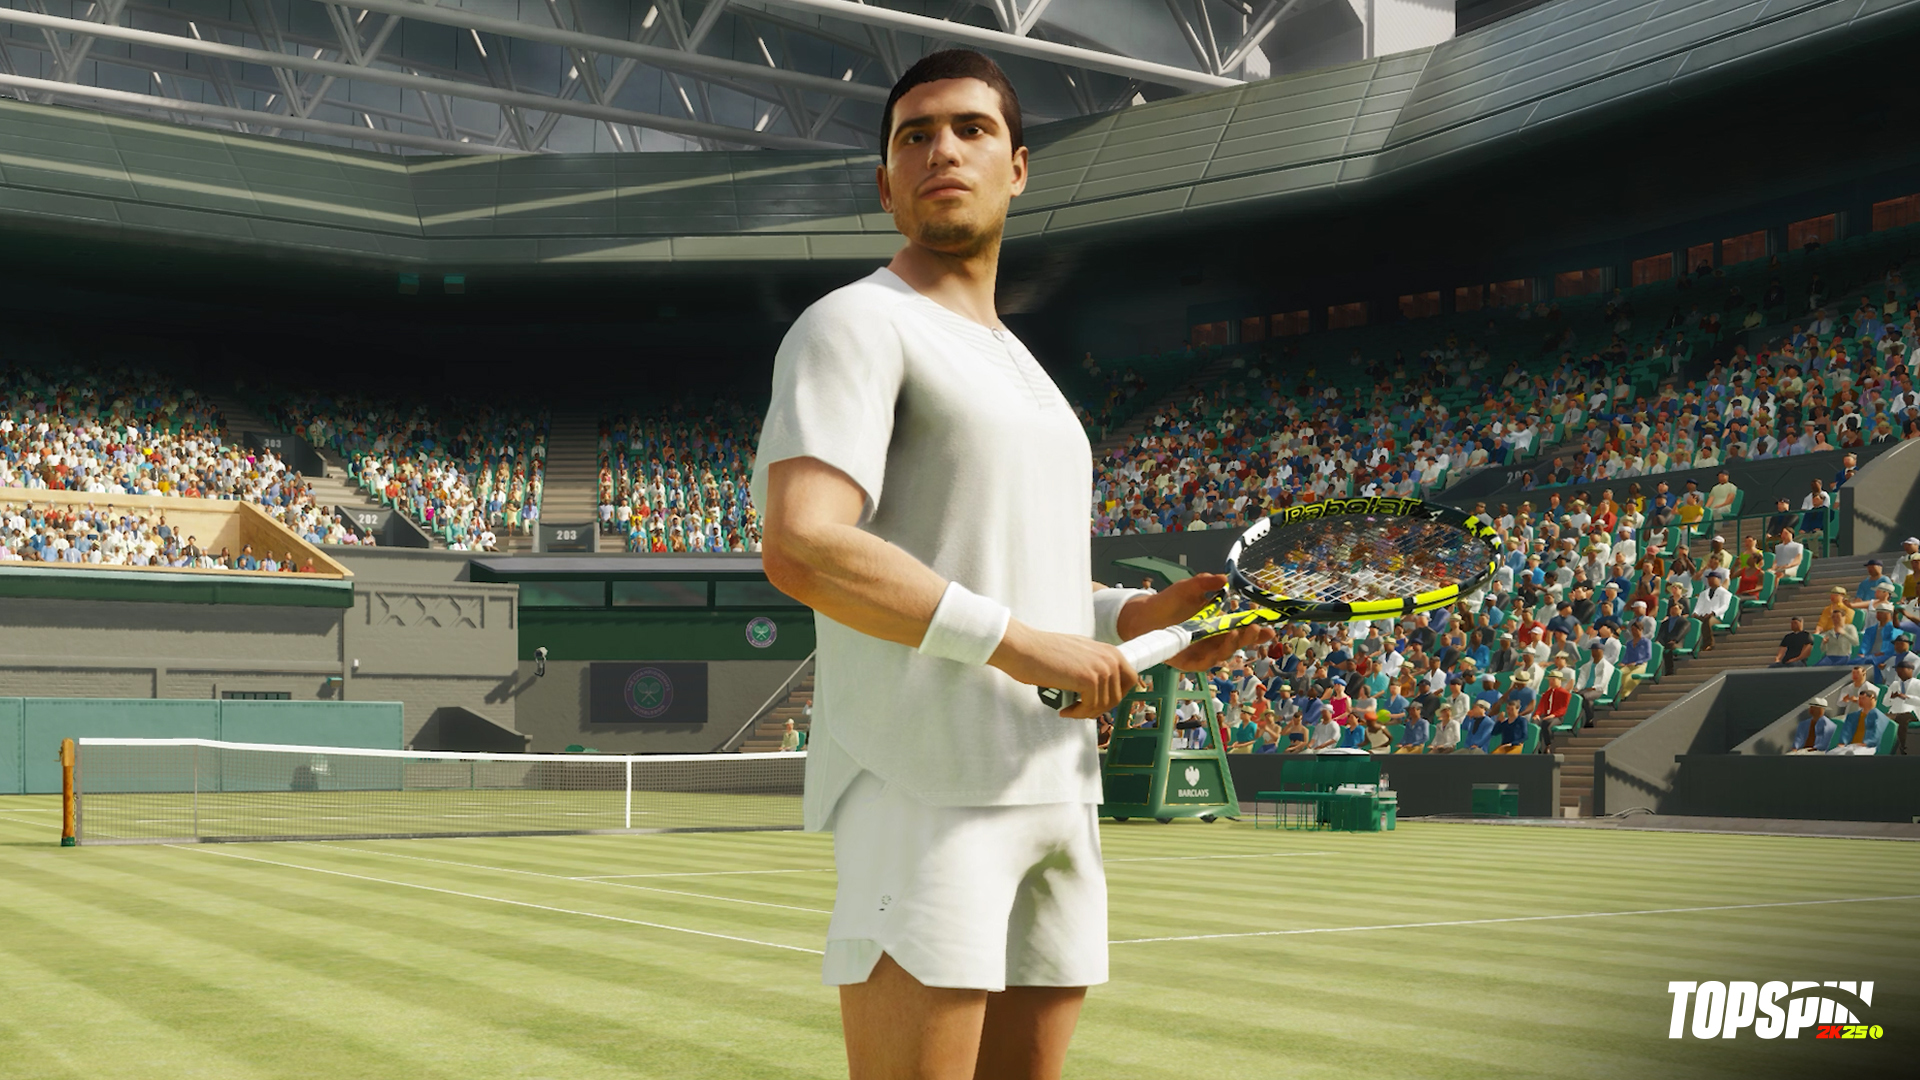 An image of Carlos Alcaraz in the TopSpin 2K25 video game 